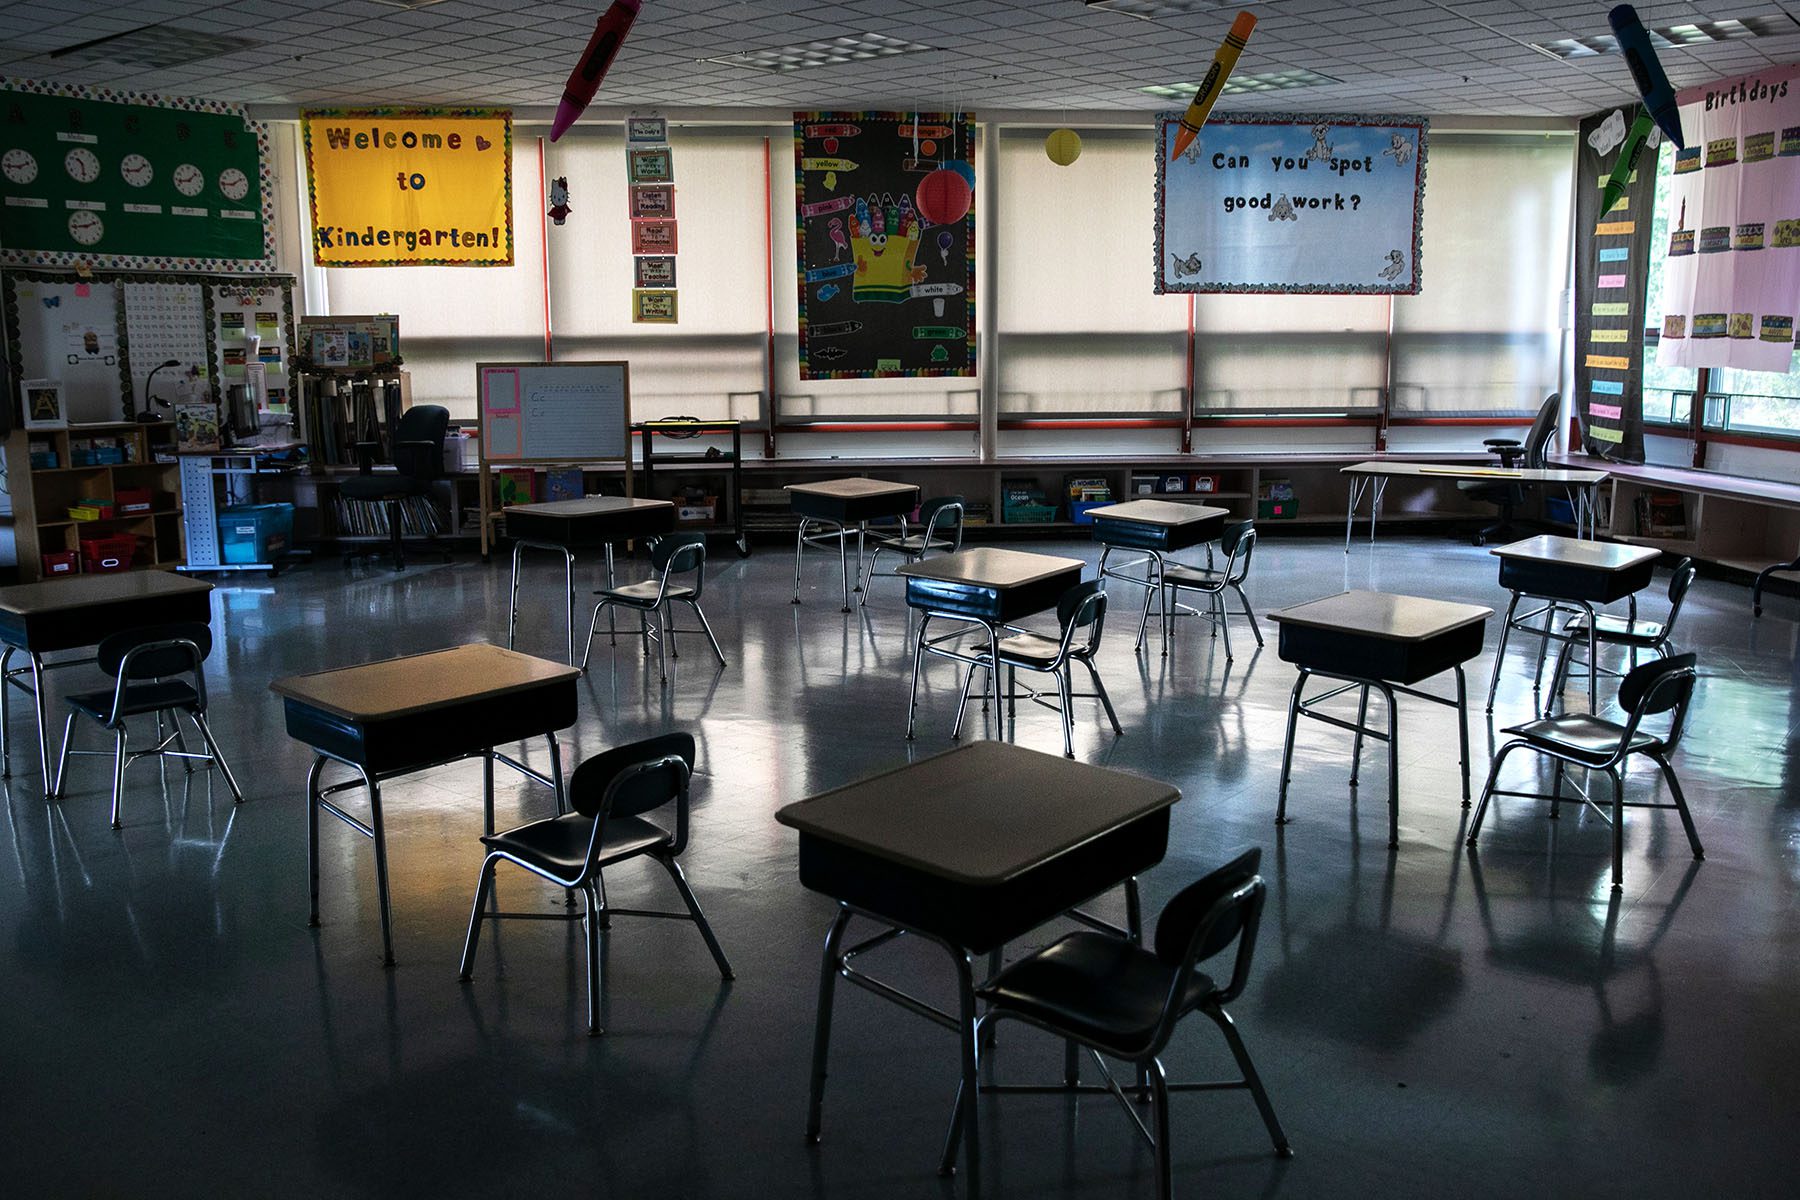 Socially distanced desks stand in an empty classroom.